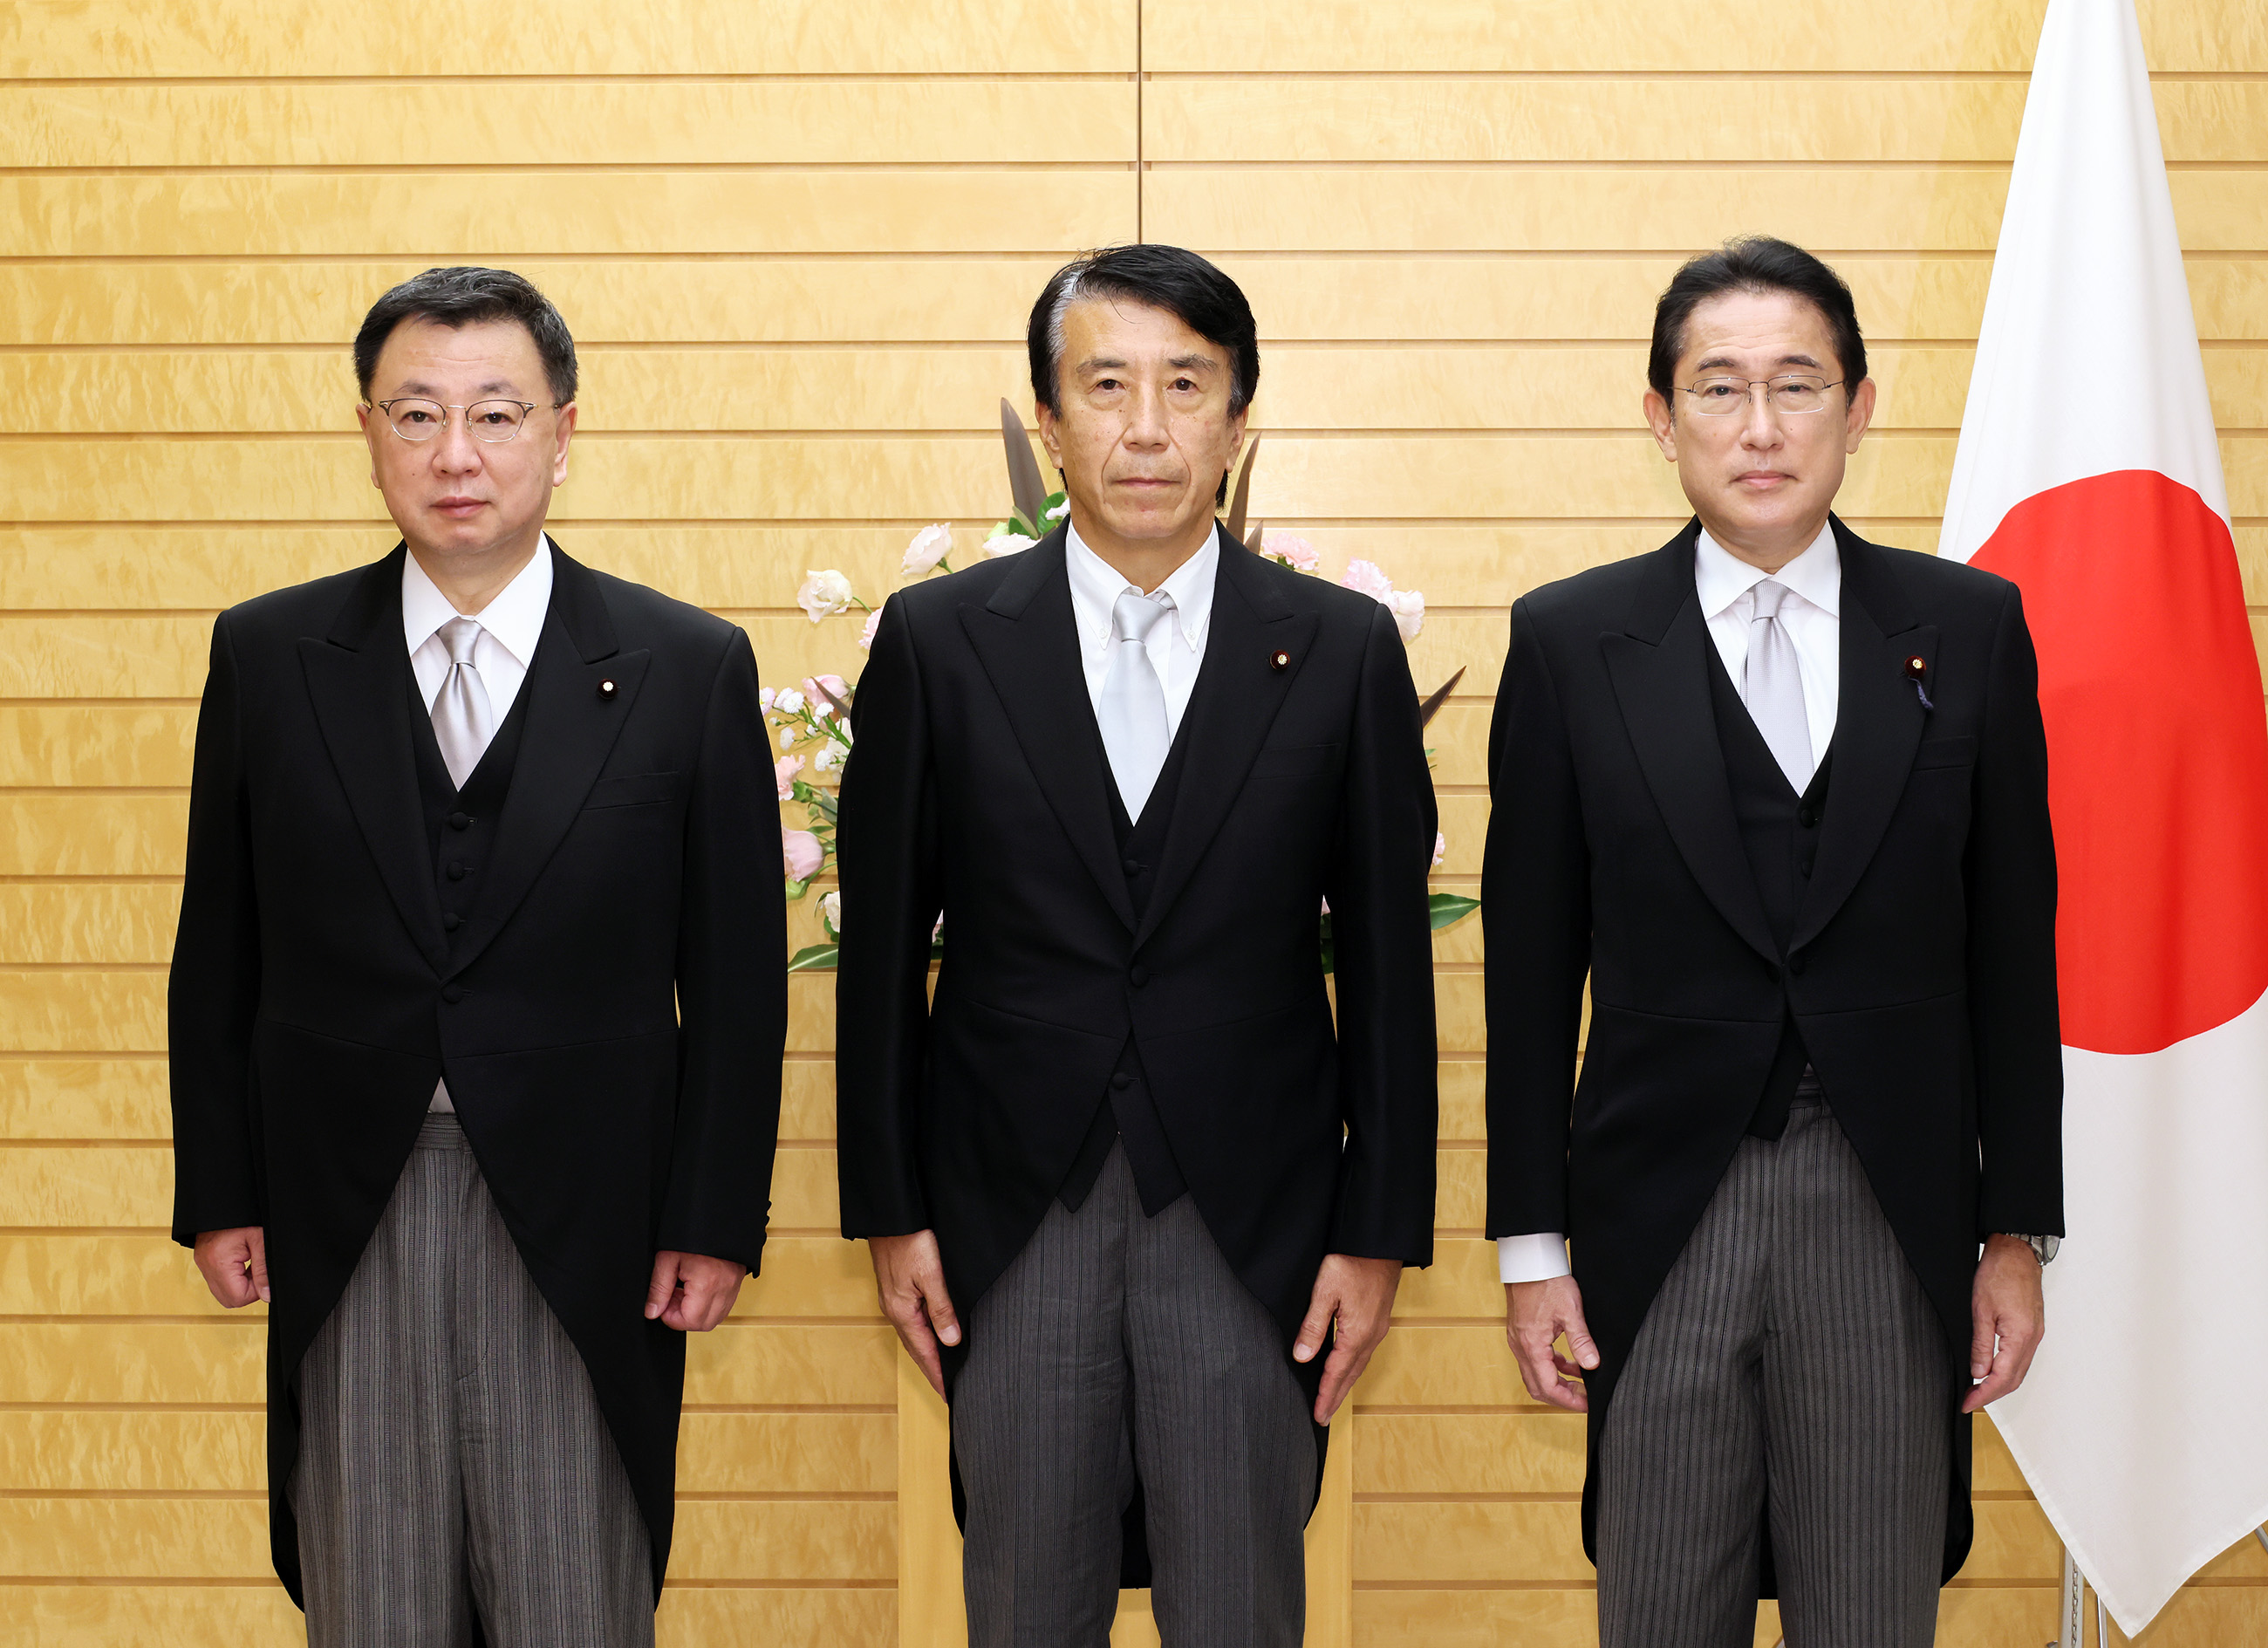 Photograph of the Prime Minister attending a photograph session with Minister Saito (2)